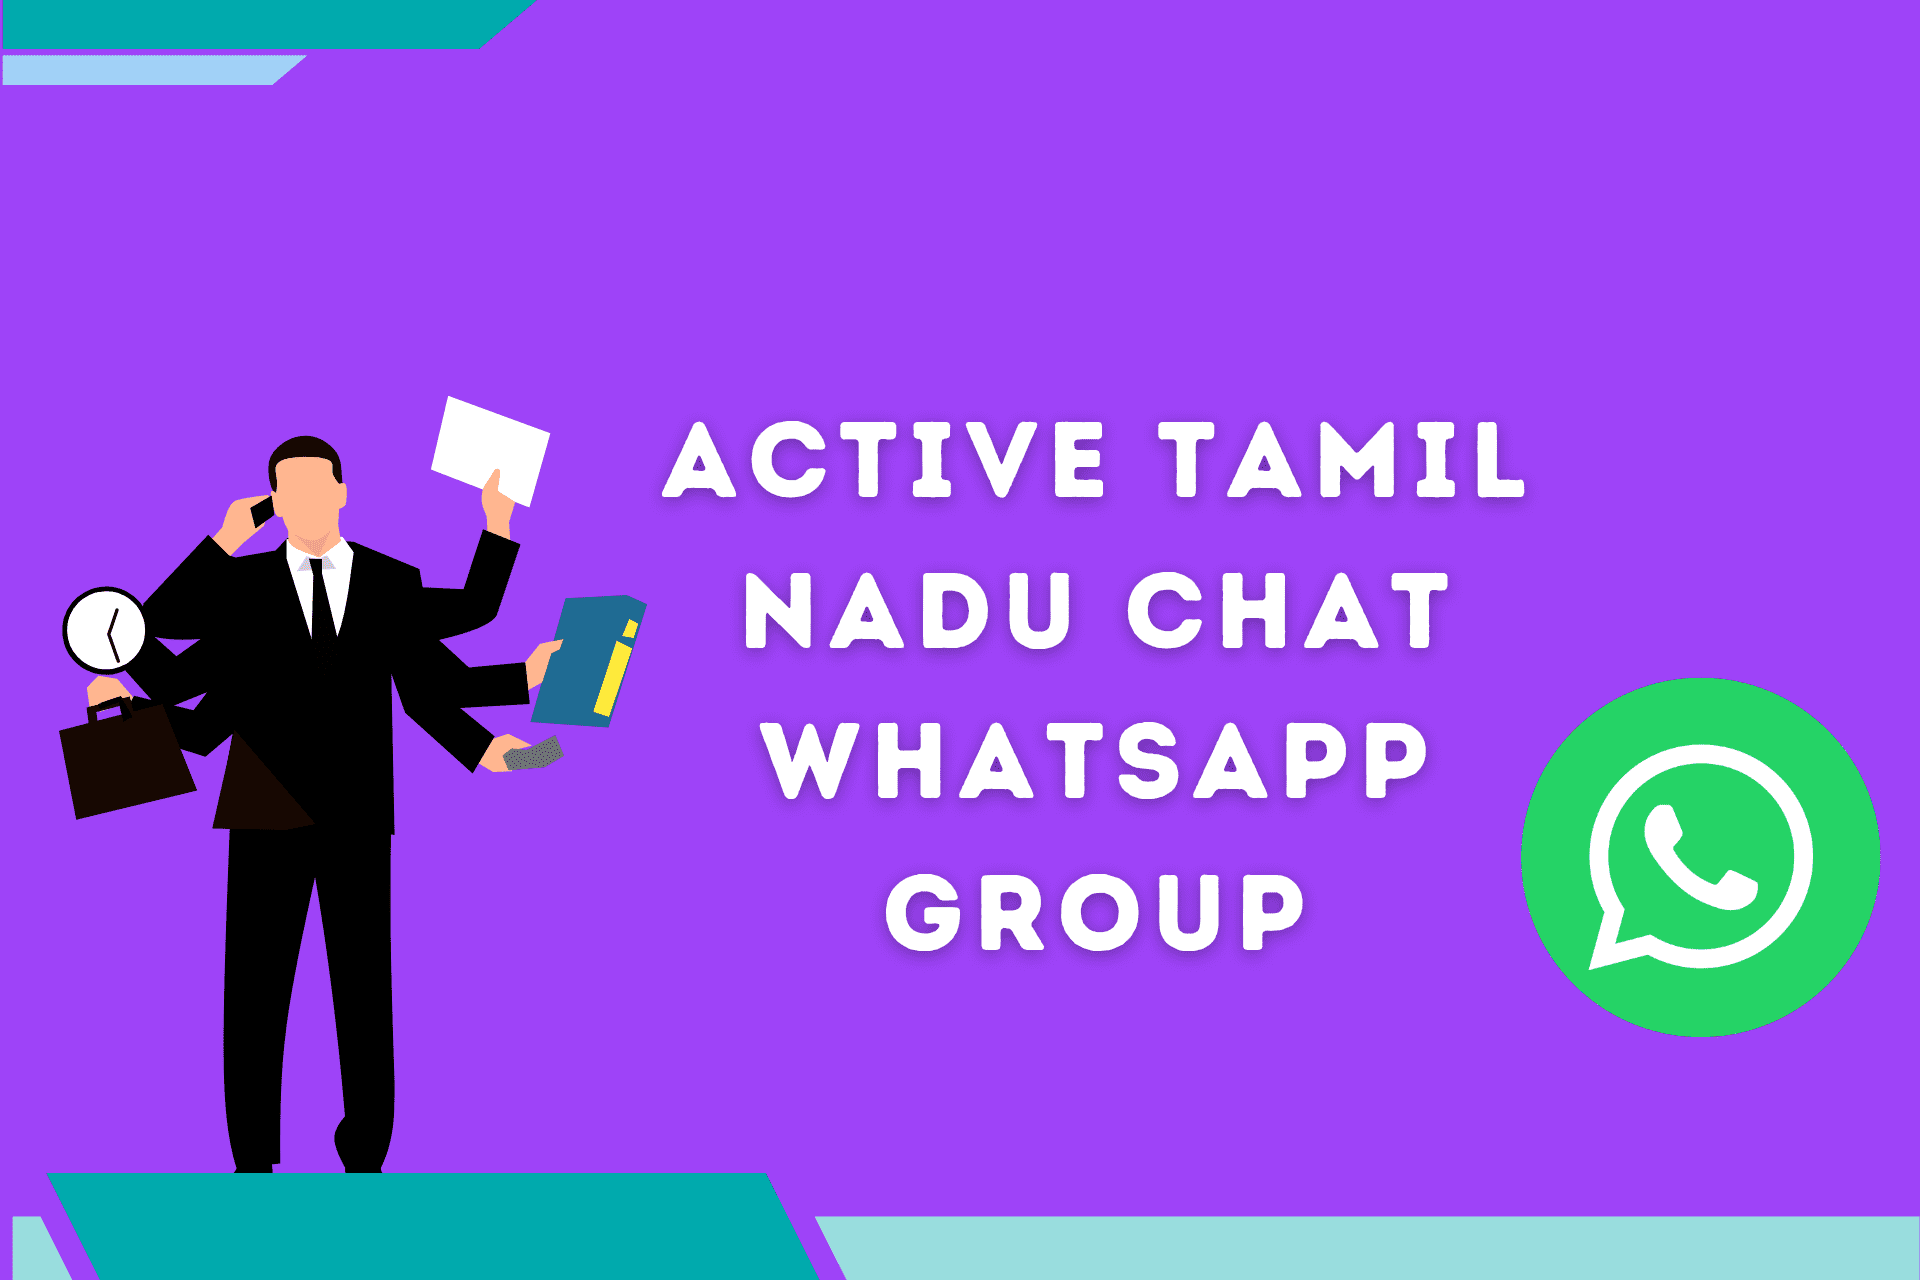 Unlimited Tamil Job WhatsApp Group Link